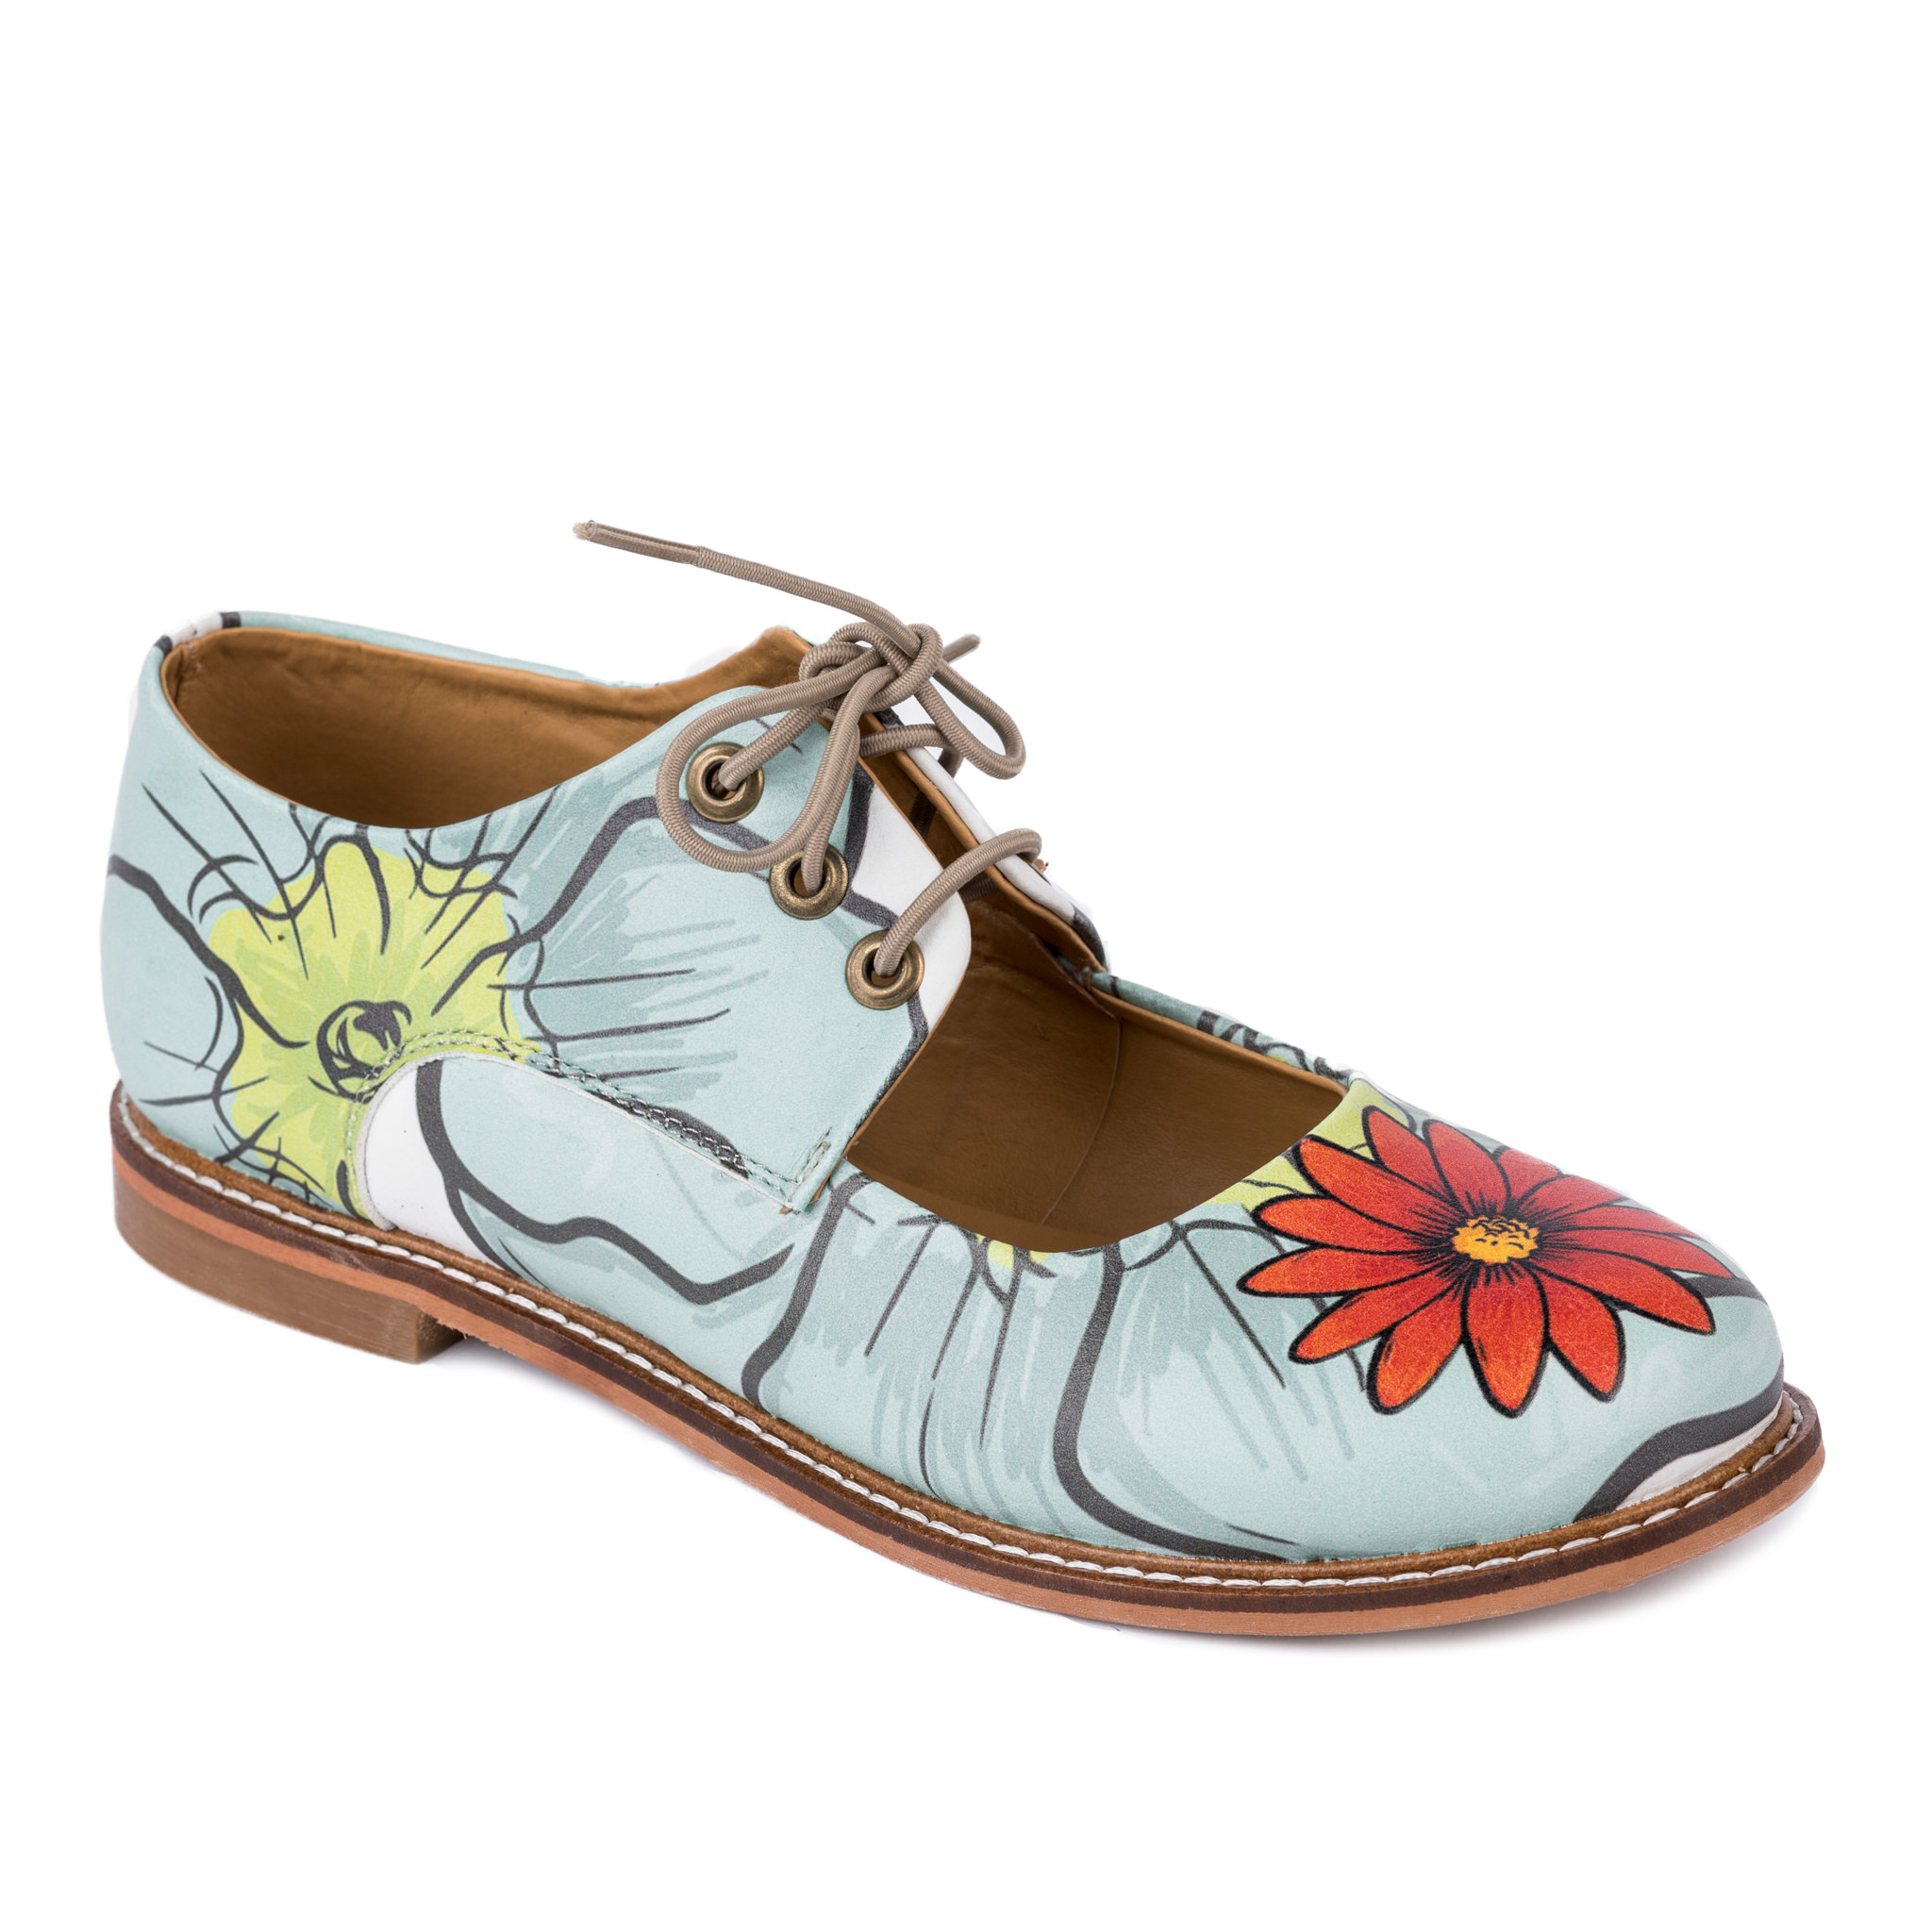 LACE UP SHOES WITH FLOWER PRINT - BLUE